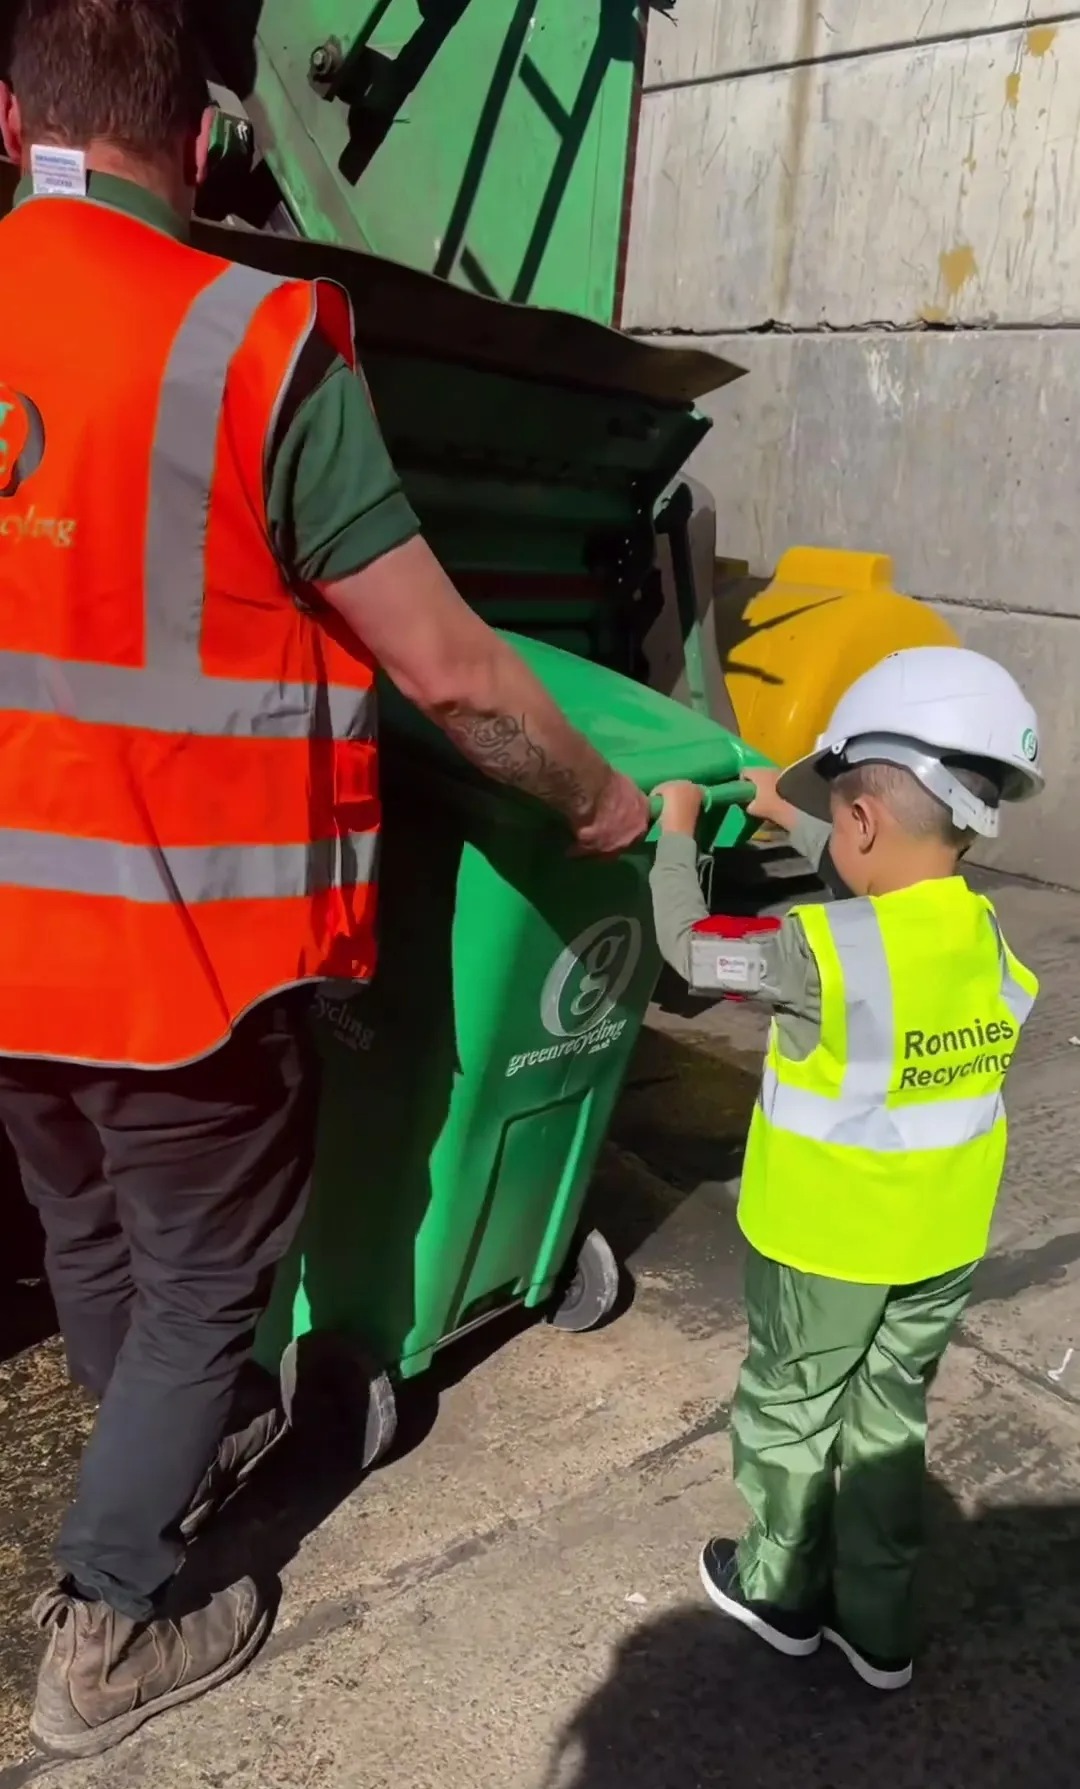 Ronnie was beaming as he loaded a bin onto a truck and watched rubbish be recycled